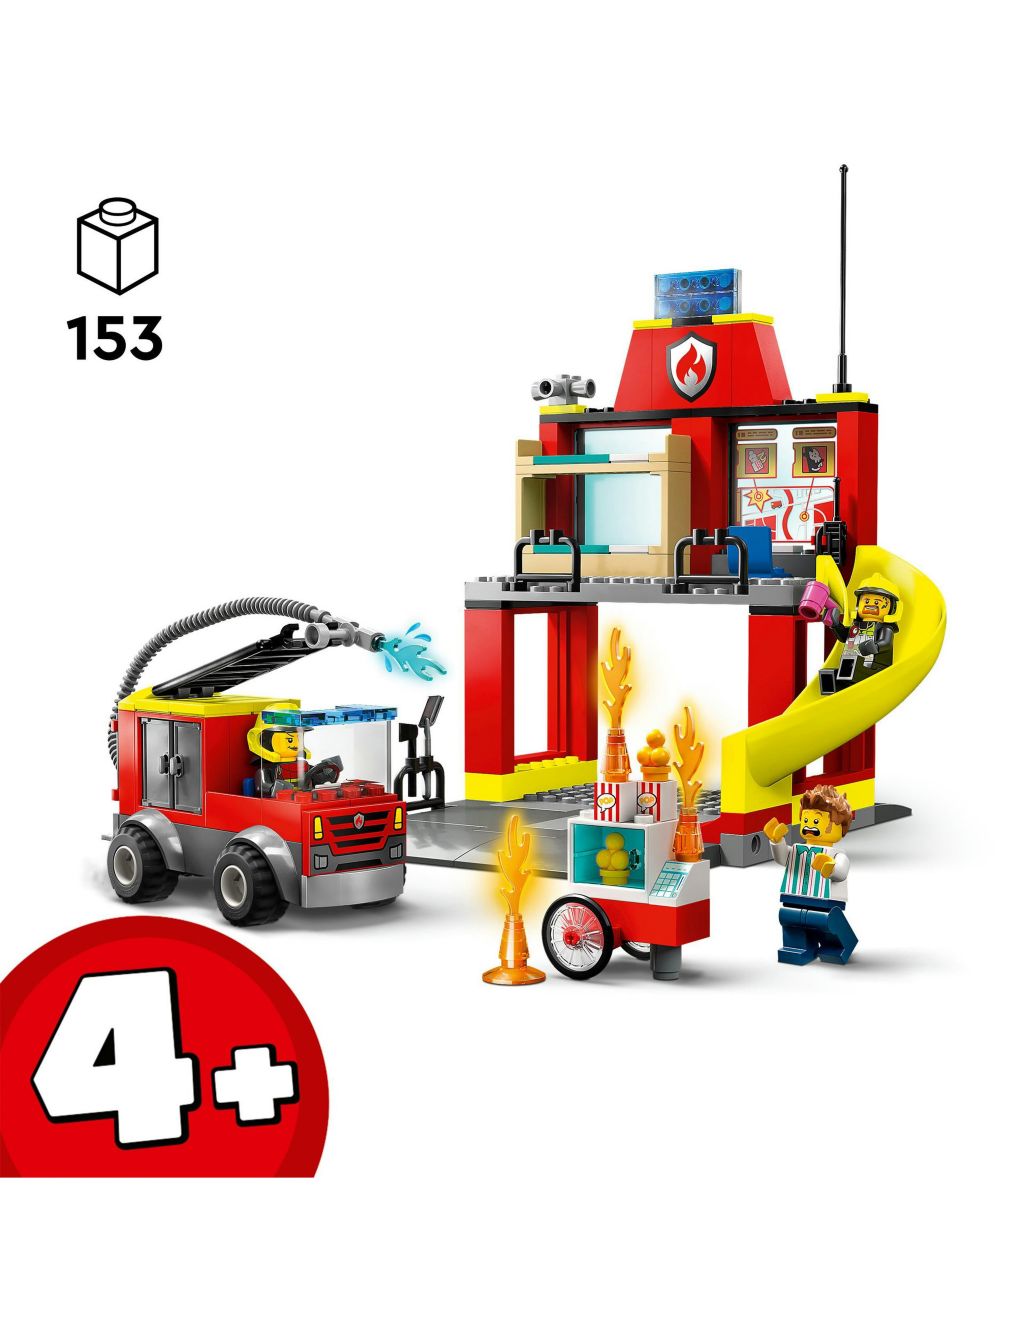 LEGO City Fire Station and Fire Engine Toys (4+ Yrs) image 2